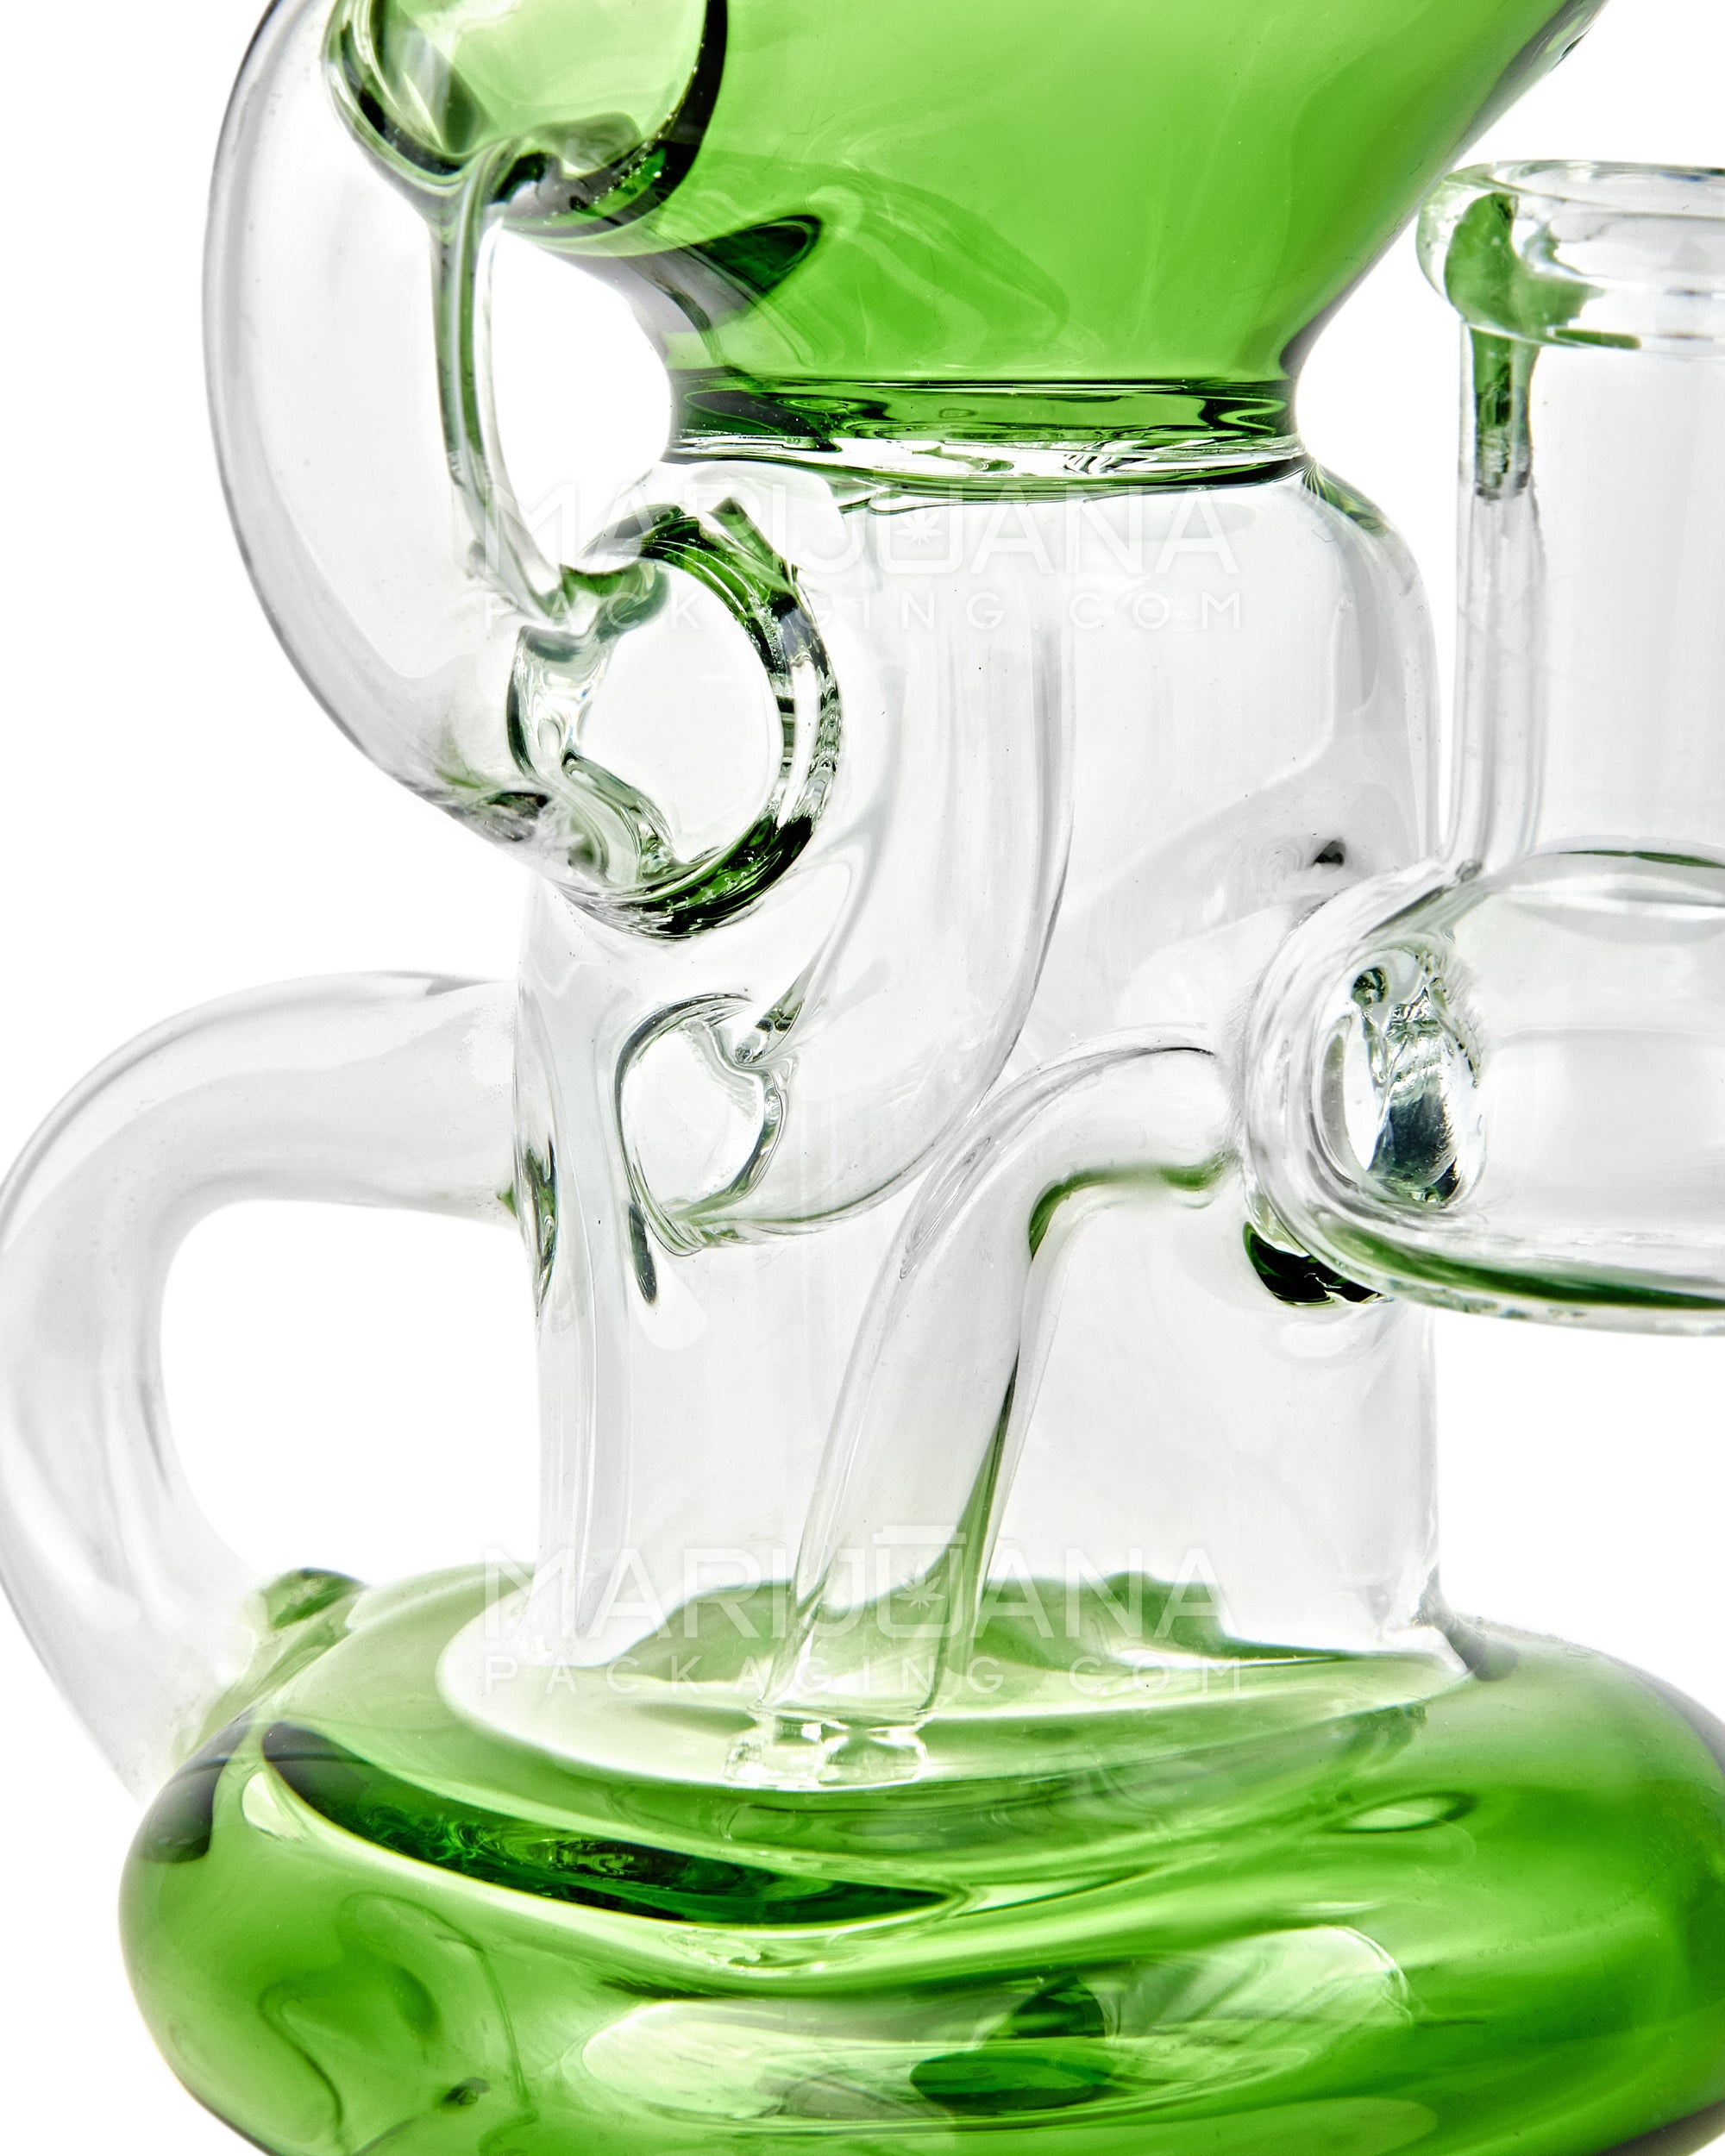 Bent Neck Diffused Perc Glass Water Pipe w/ Recycler | 8in Tall - 14mm Bowl - Green - 2